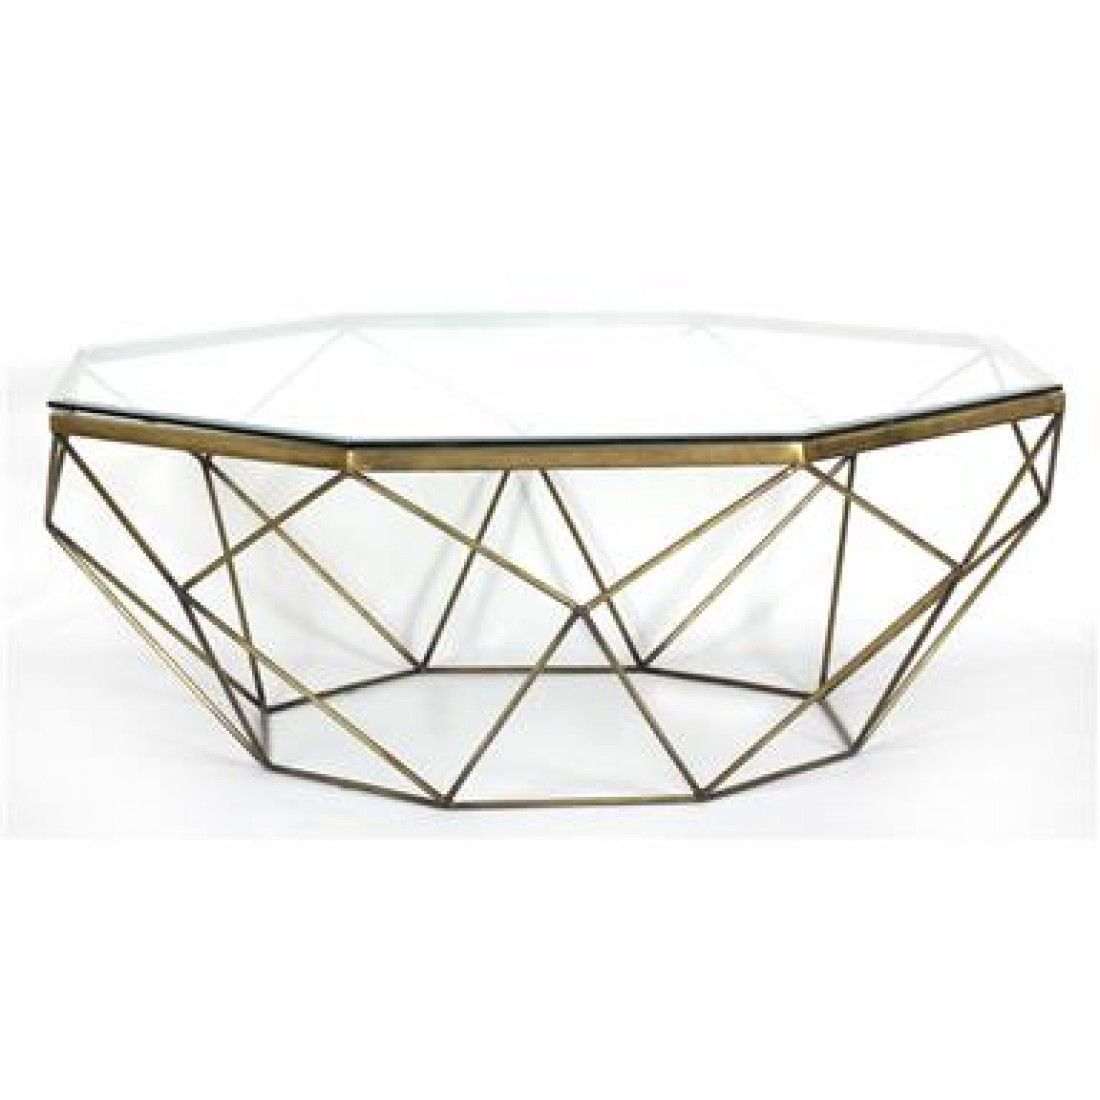 Marlow Geometric Coffee Table Antique Brass | Geometric With Regard To Geometric Coffee Tables (View 13 of 15)